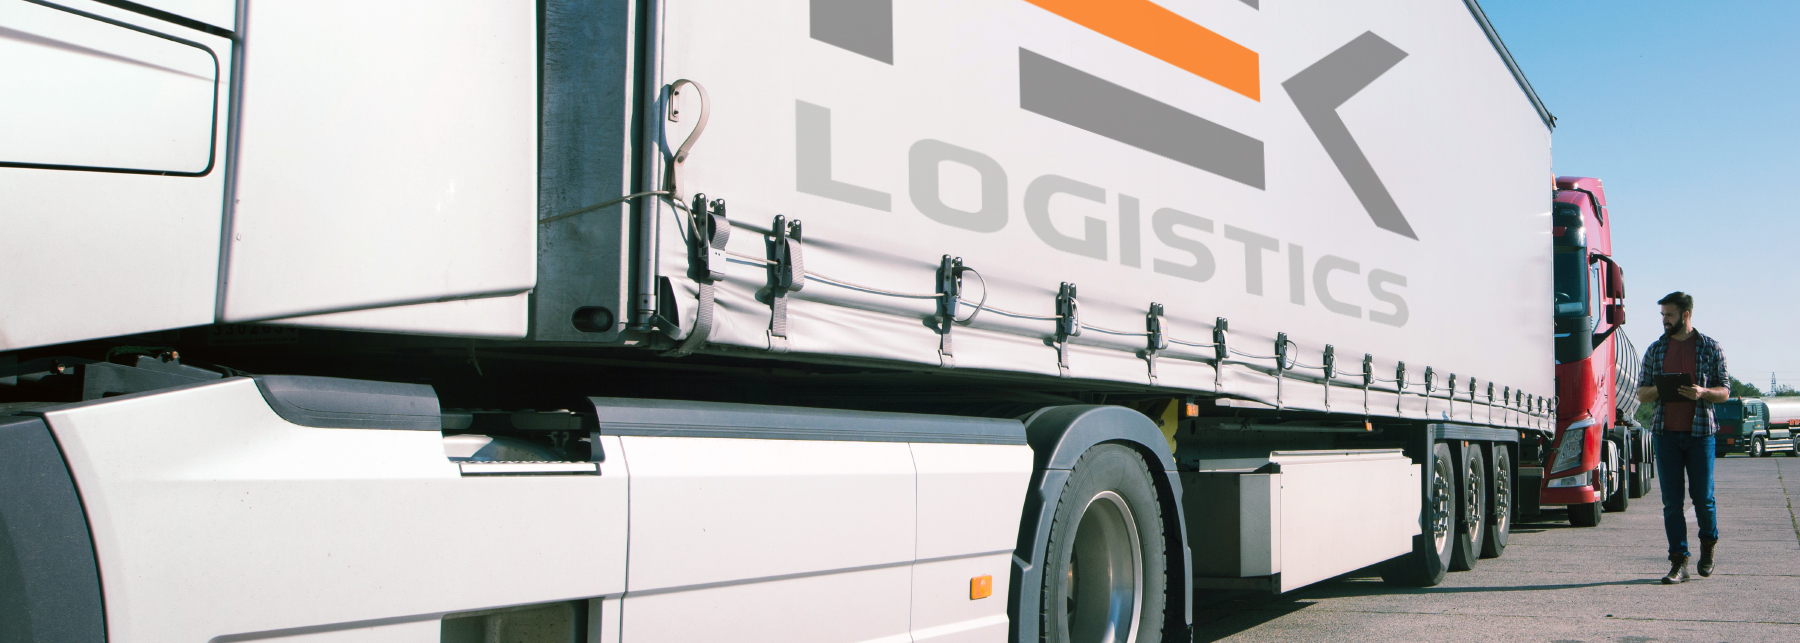 Chicago Based Logistic Company Safety is our Priority | Freight Management and Shipping for Commercial